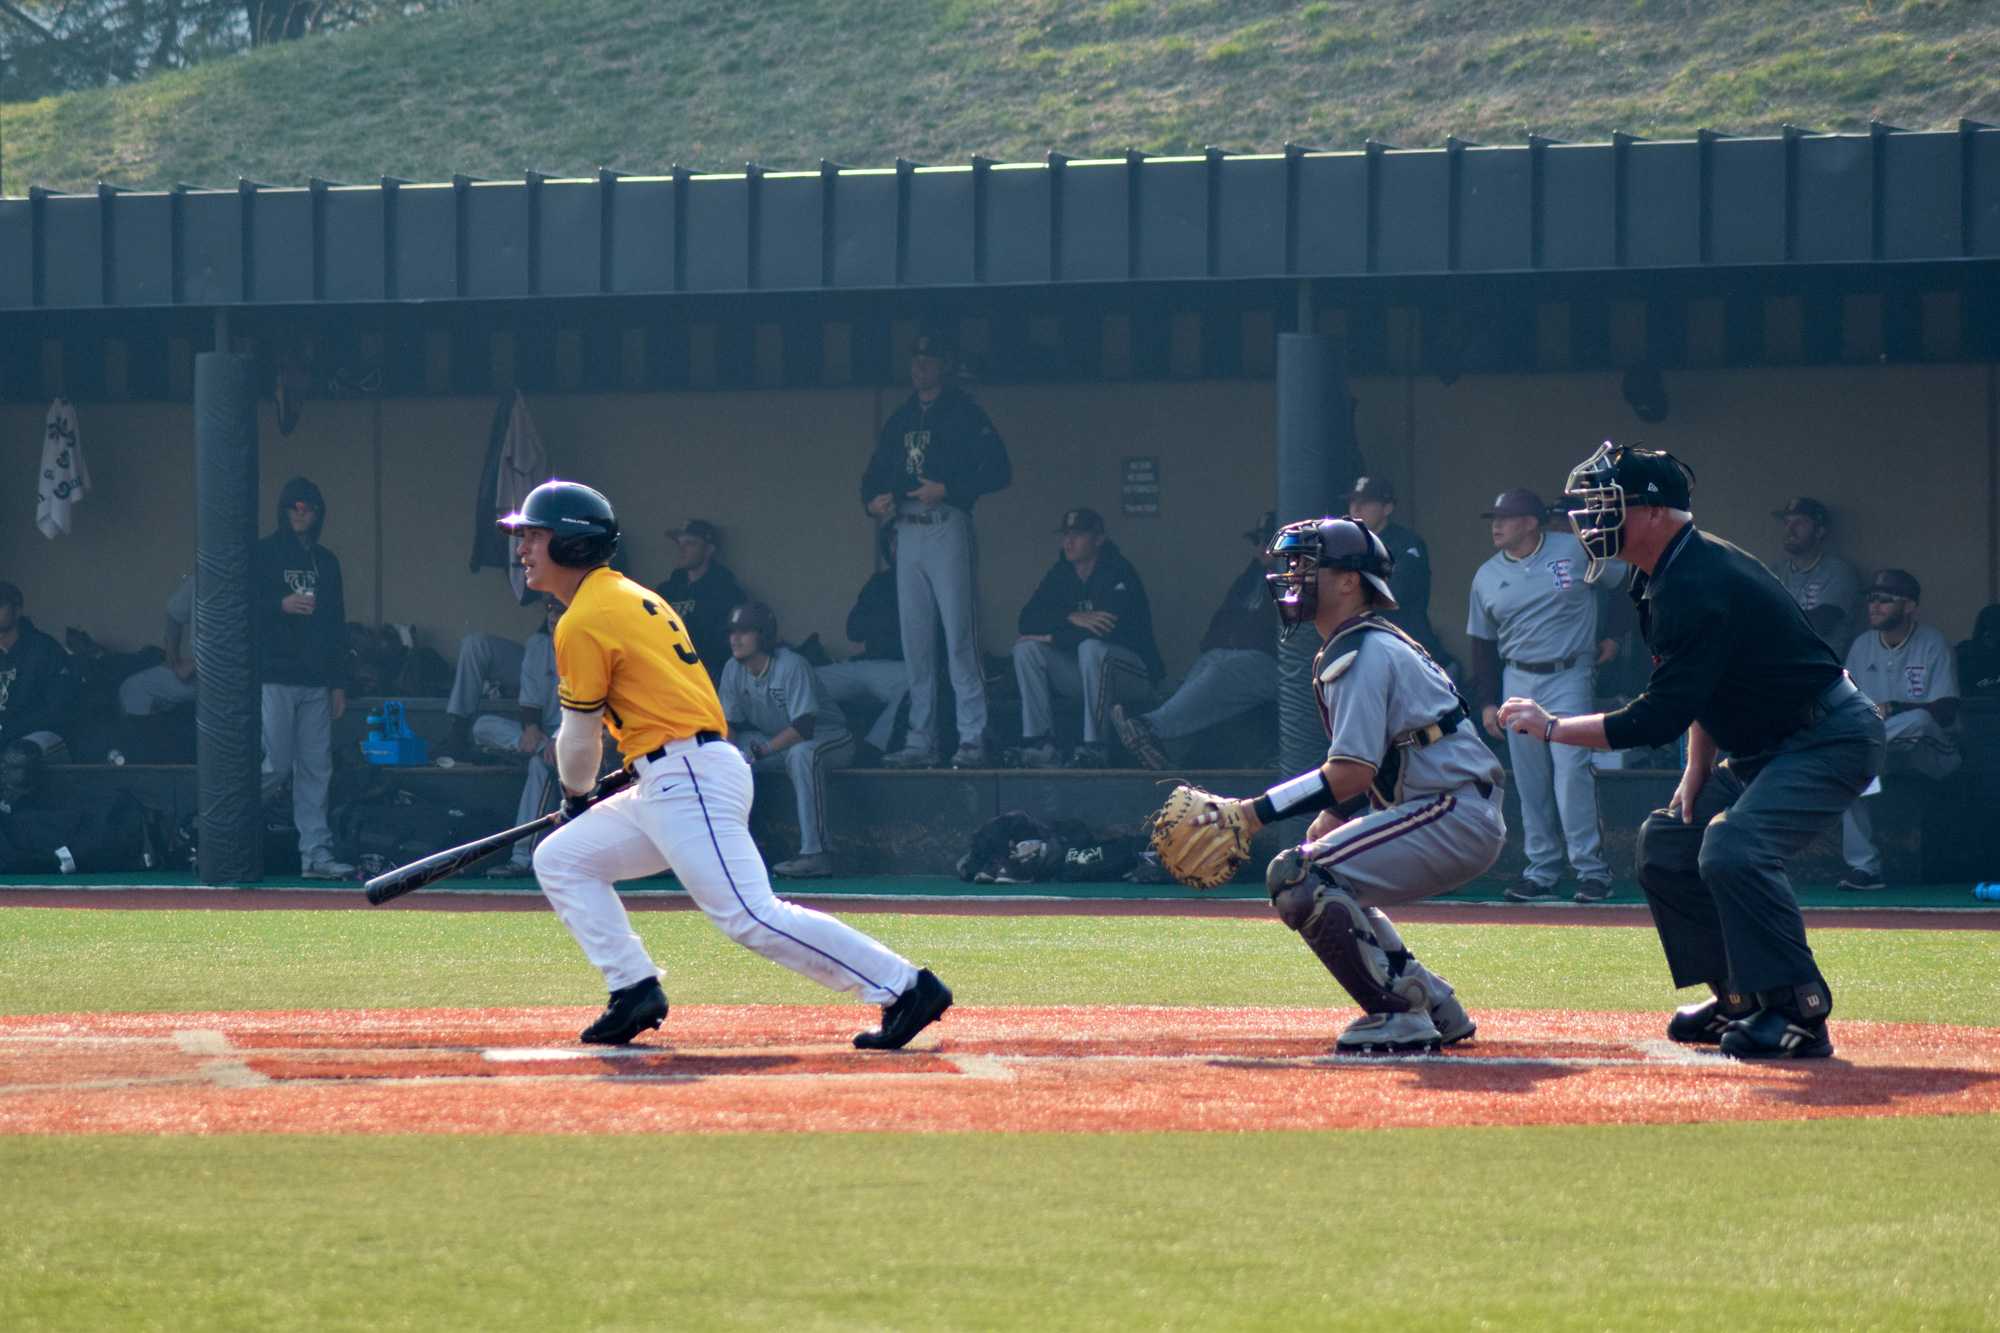 Matt Vernon hitting against Texas State. The Mountaineers lost in all three games to Texas State with the final scores being 3-6, 4-7, and 0-2.